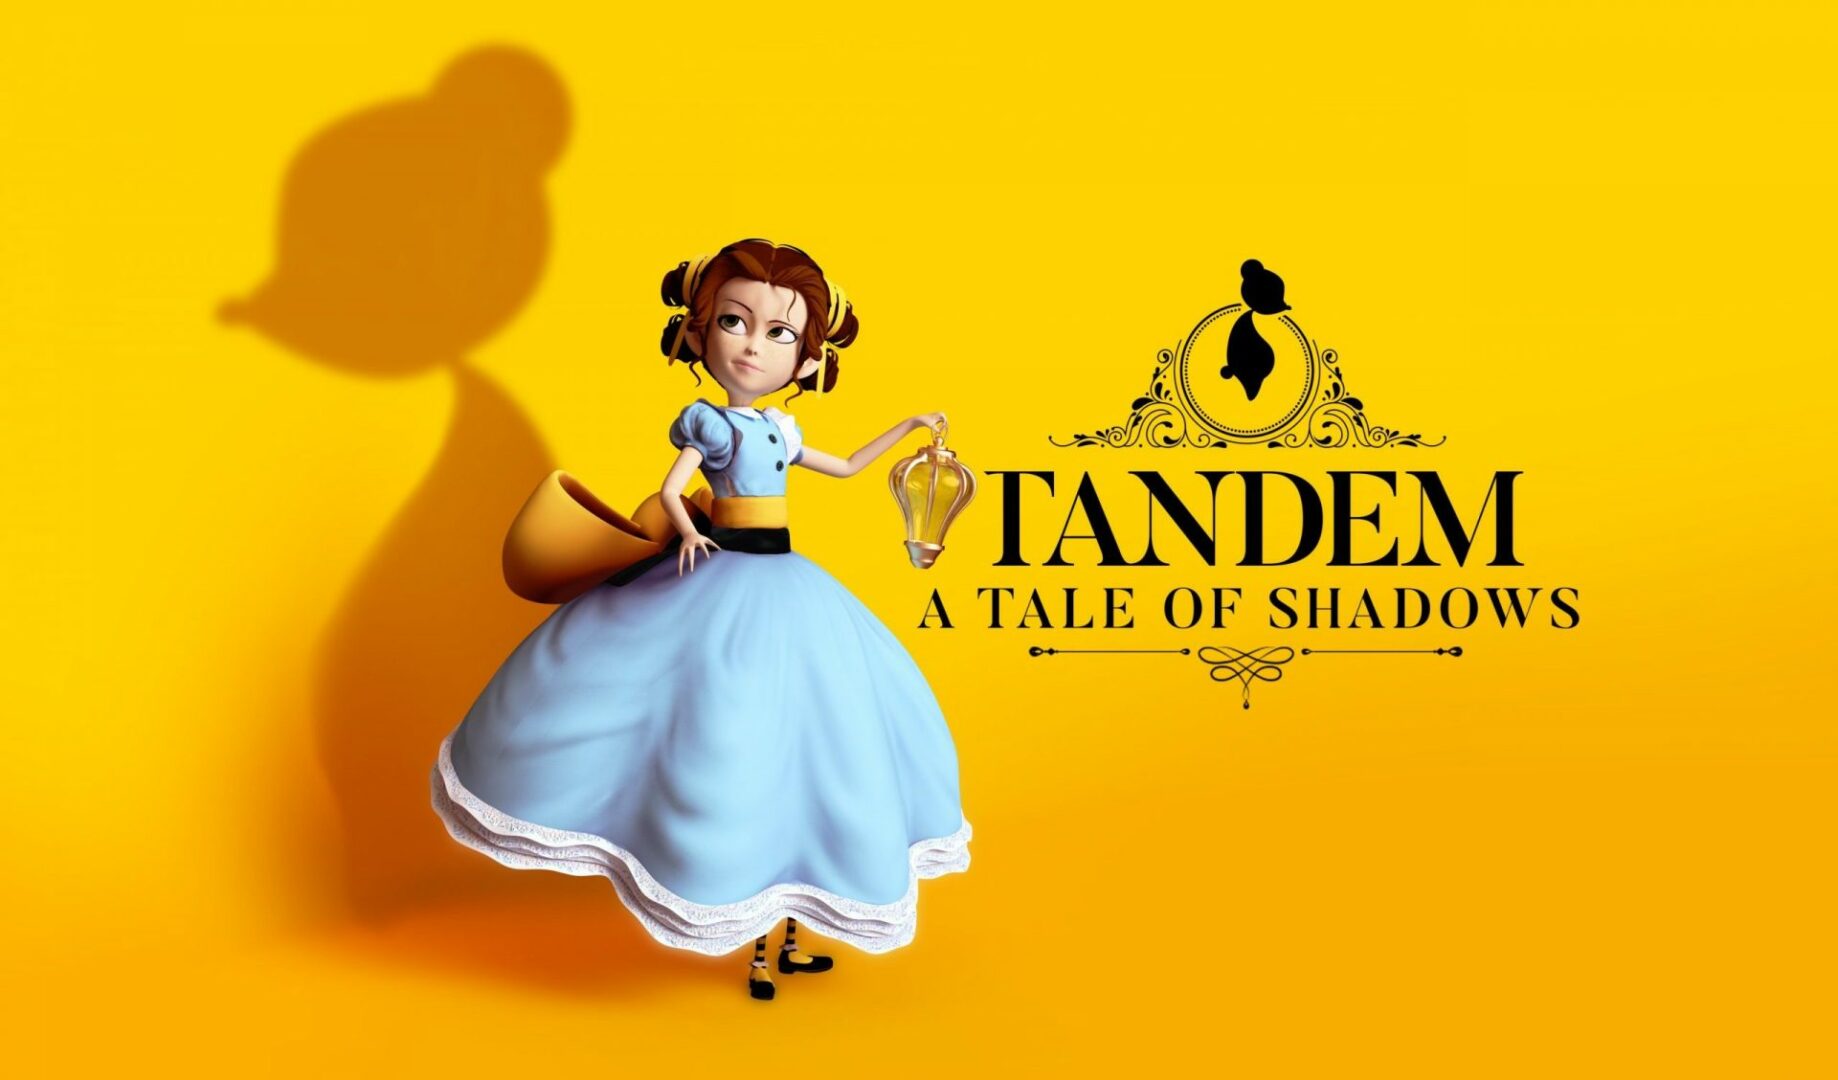 Tandem A Tale of Shadows Game News Indie Game Fans News